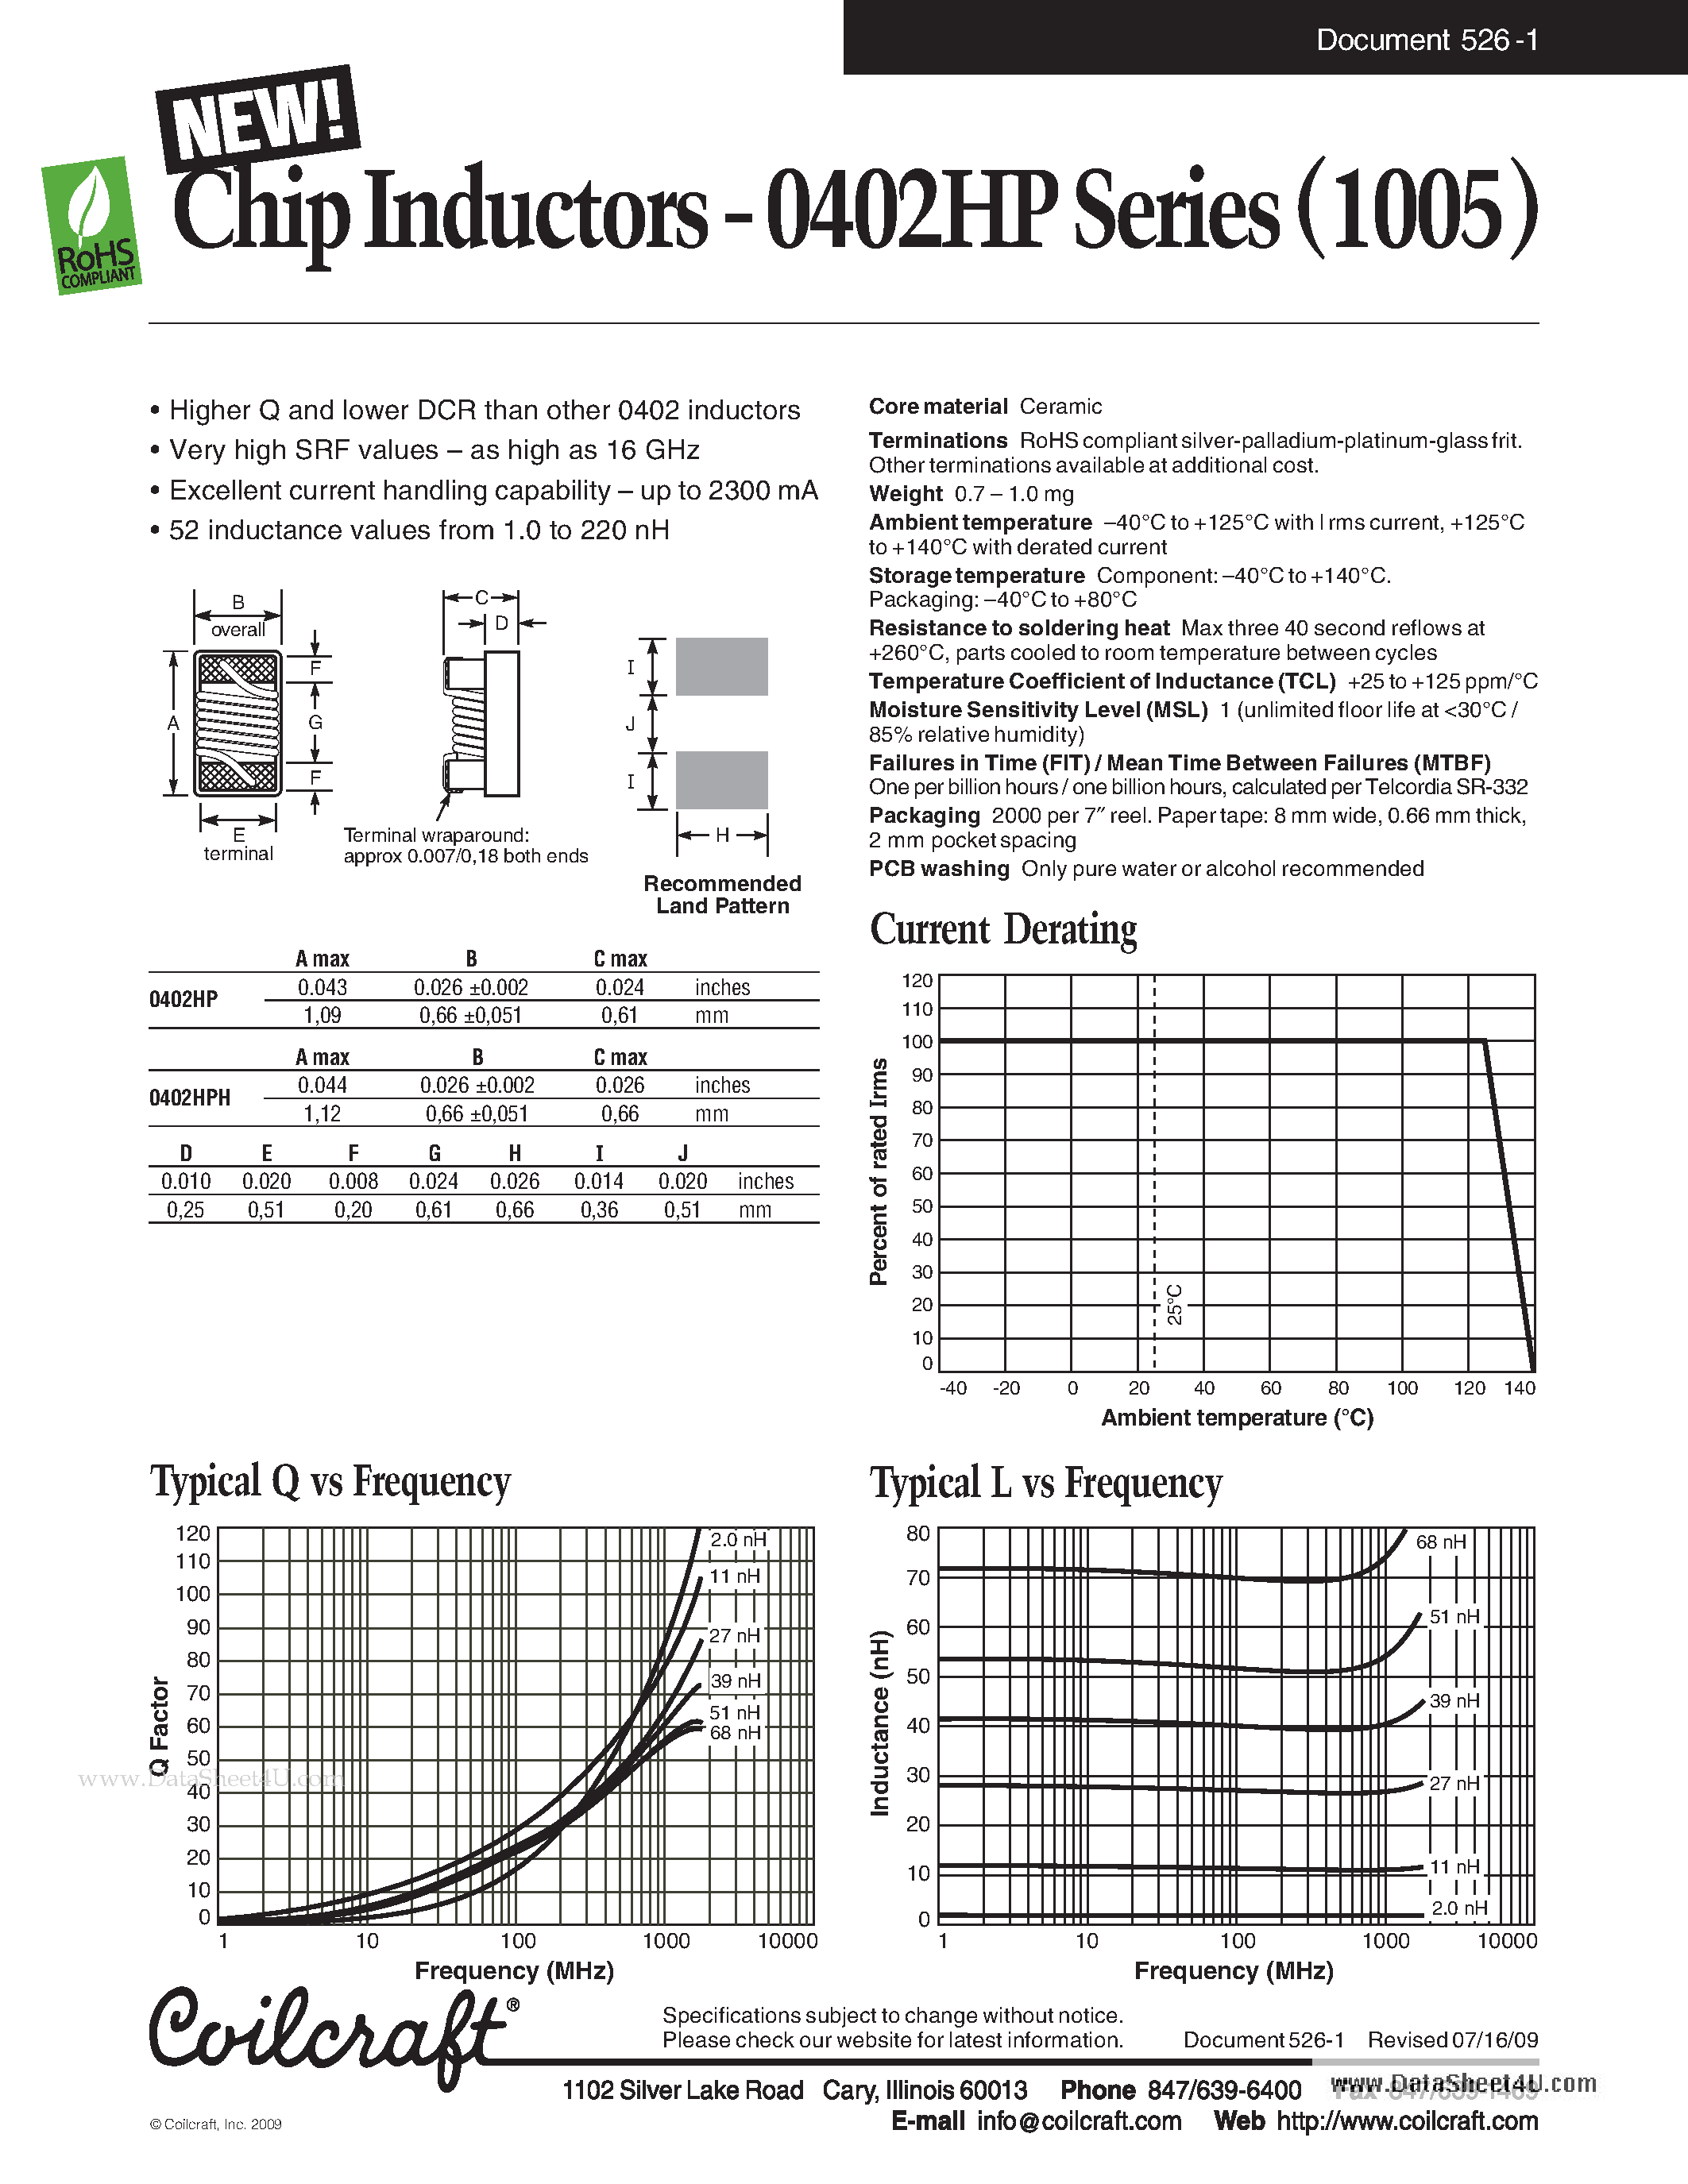 Datasheet 0402HP - Chip Inductors page 1